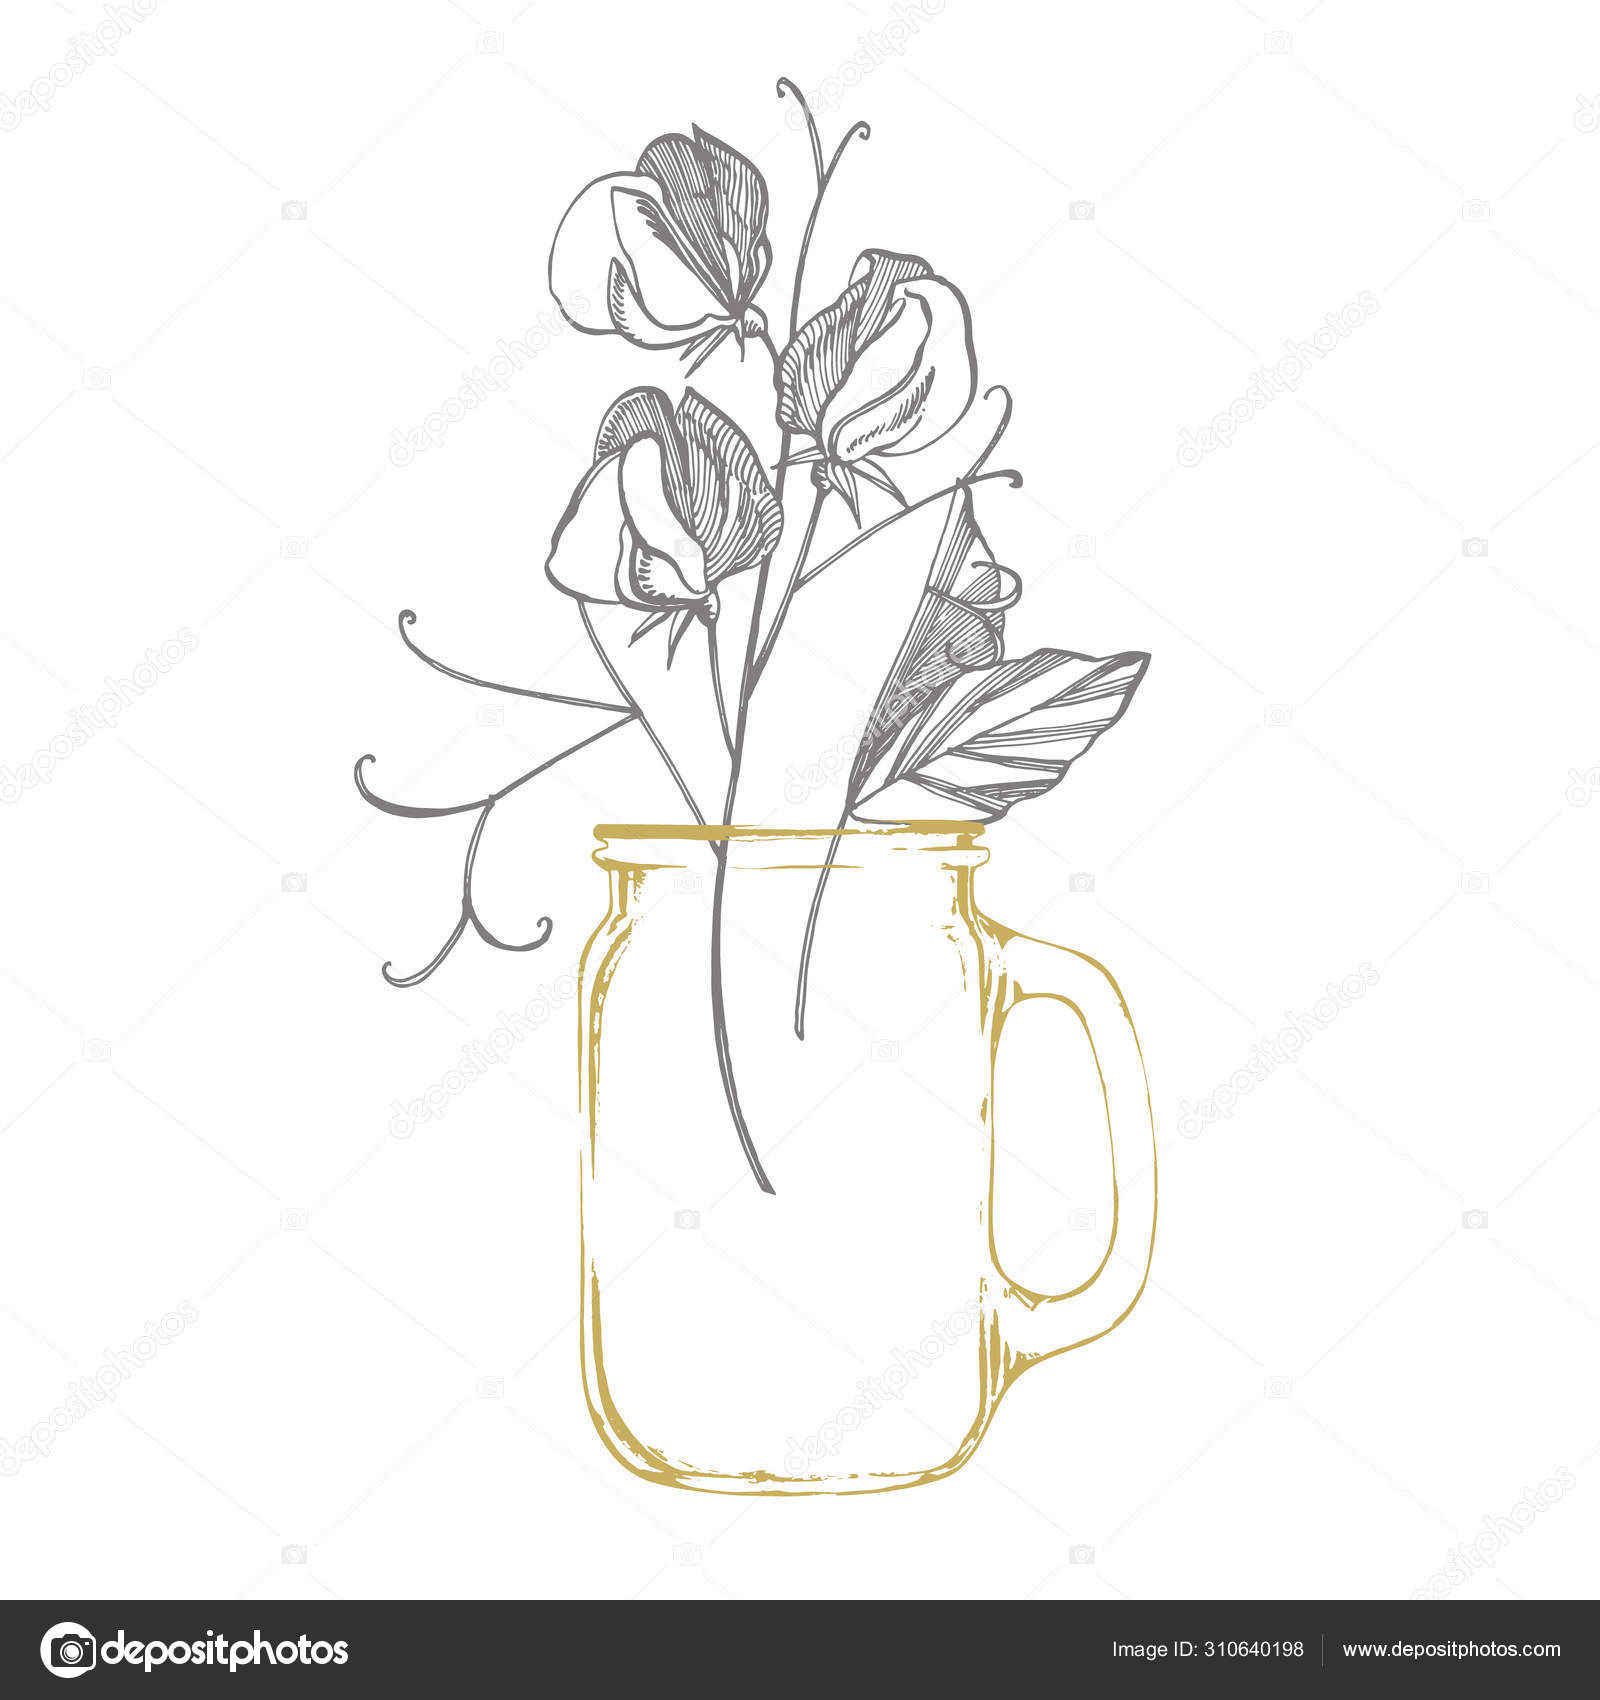 Sweet Pea Flowers Drawing And Sketch With Line Art On White Backgrounds Floral Pattern With Flowers Of Sweet Peas Elegant The Template For Fabric Paper Postcard Stock Vector C Asetrova 310640198